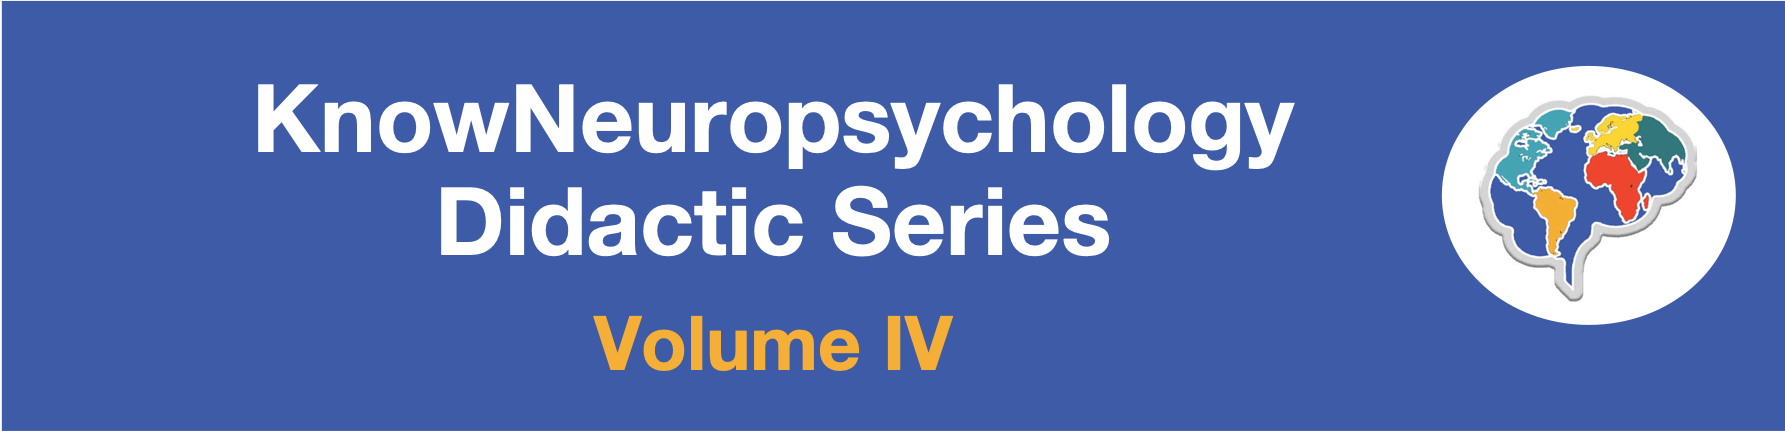 KnowNeuropsychology Didactic Series Volume Four